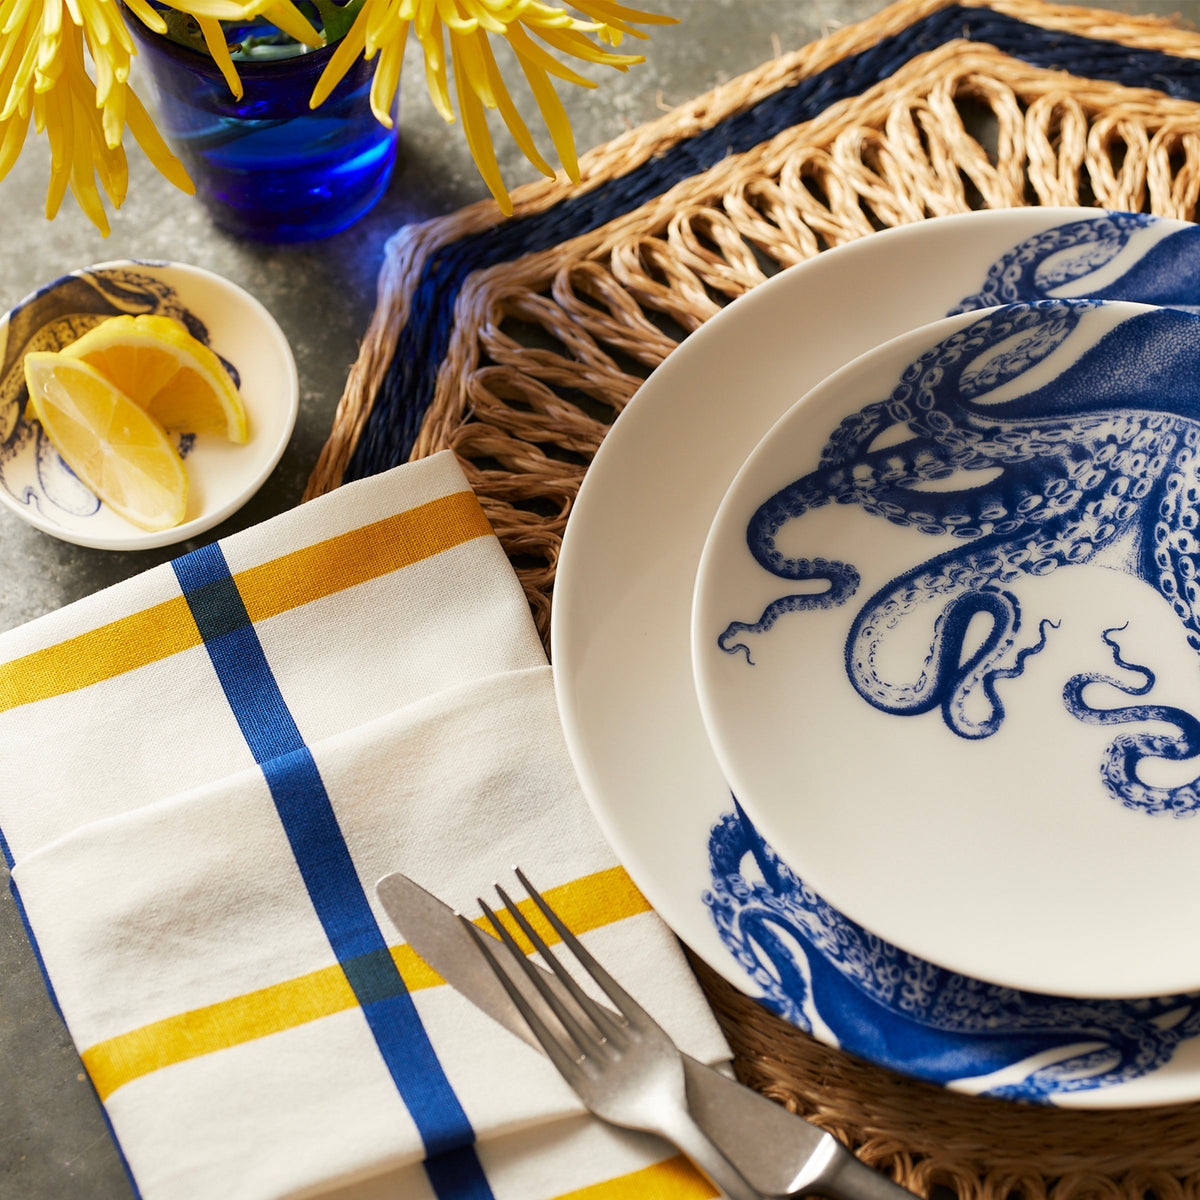 A table setting with blue and white Lucy Coupe Dinner Plates by Caskata Artisanal Home, a yellow and blue checked napkin, a fork and knife, a small dish with lemon wedges, and a blue vase with yellow flowers.